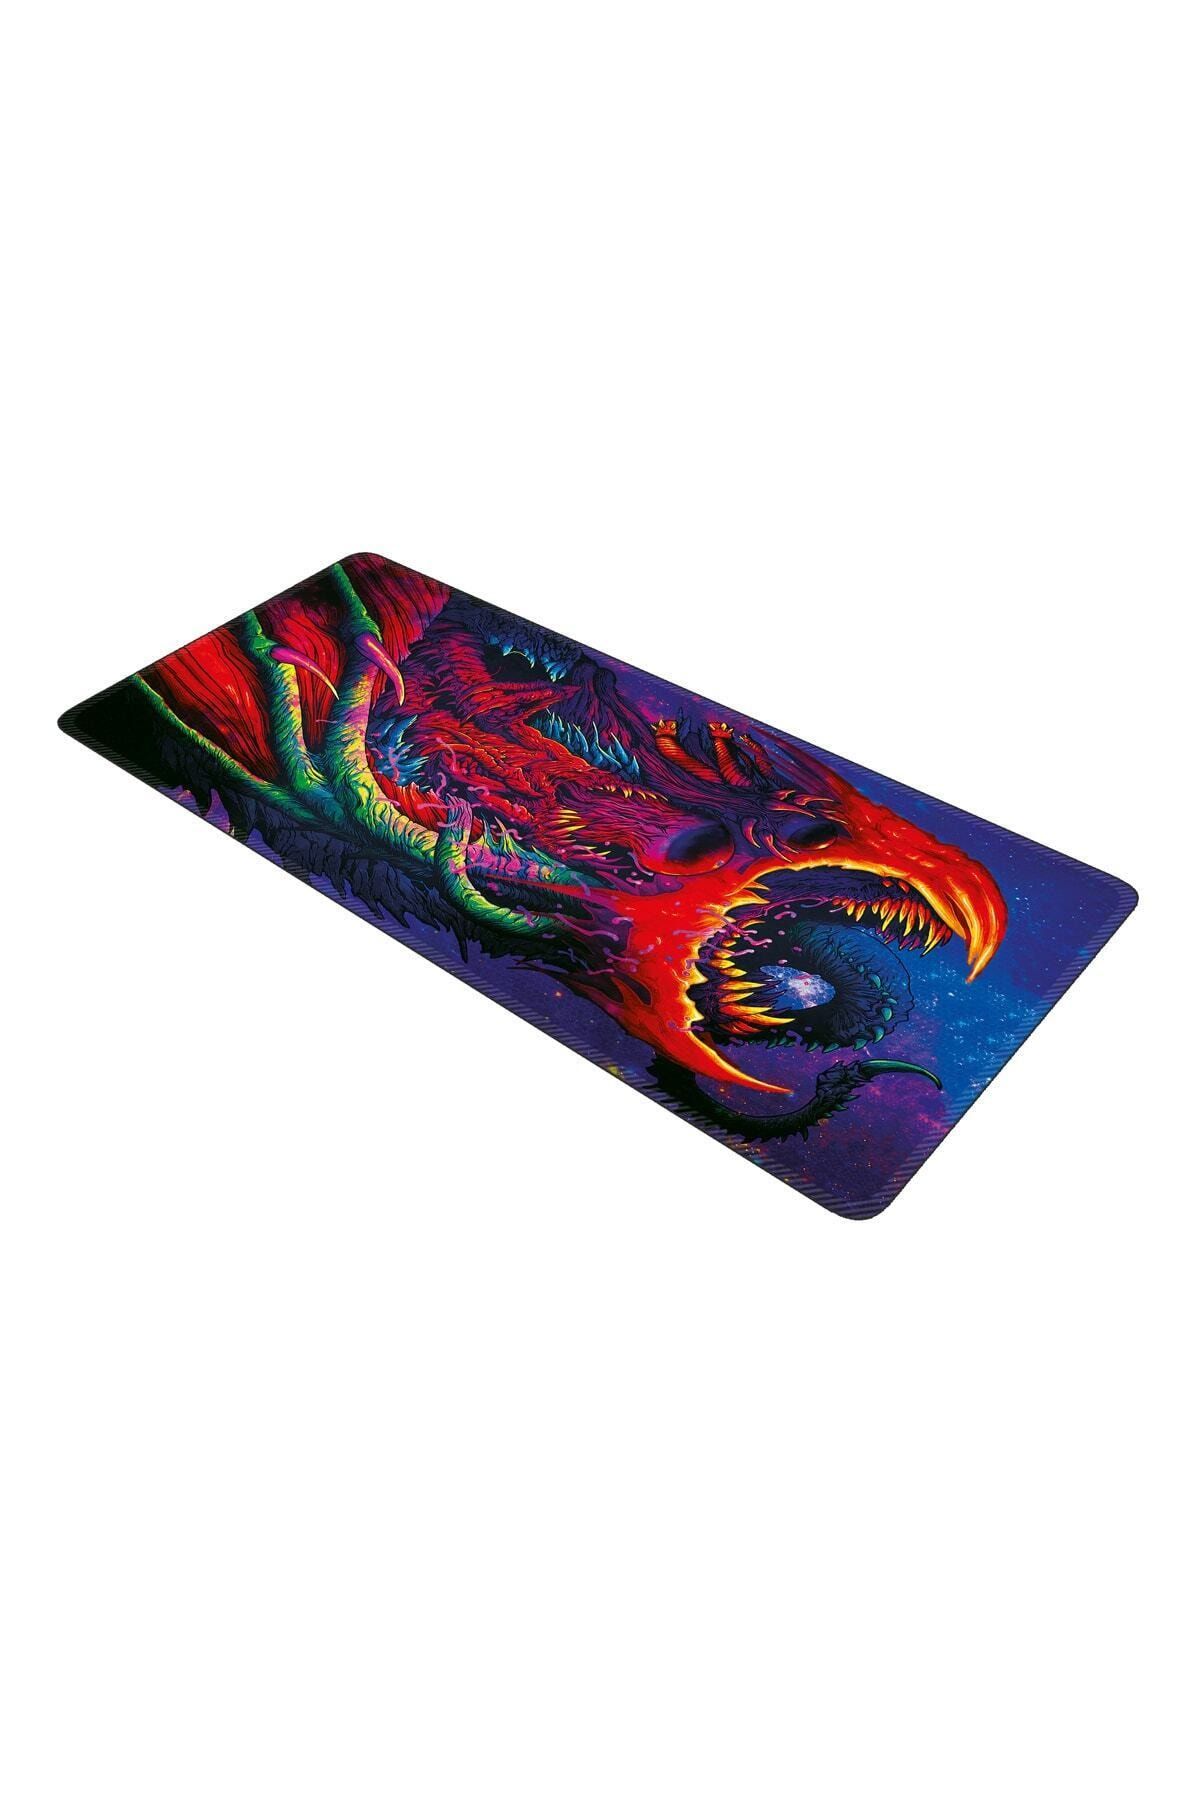 Xrades Space Hyper 90x40 Cm Xxl Gaming Oyuncu Mousepad Mouse Pad